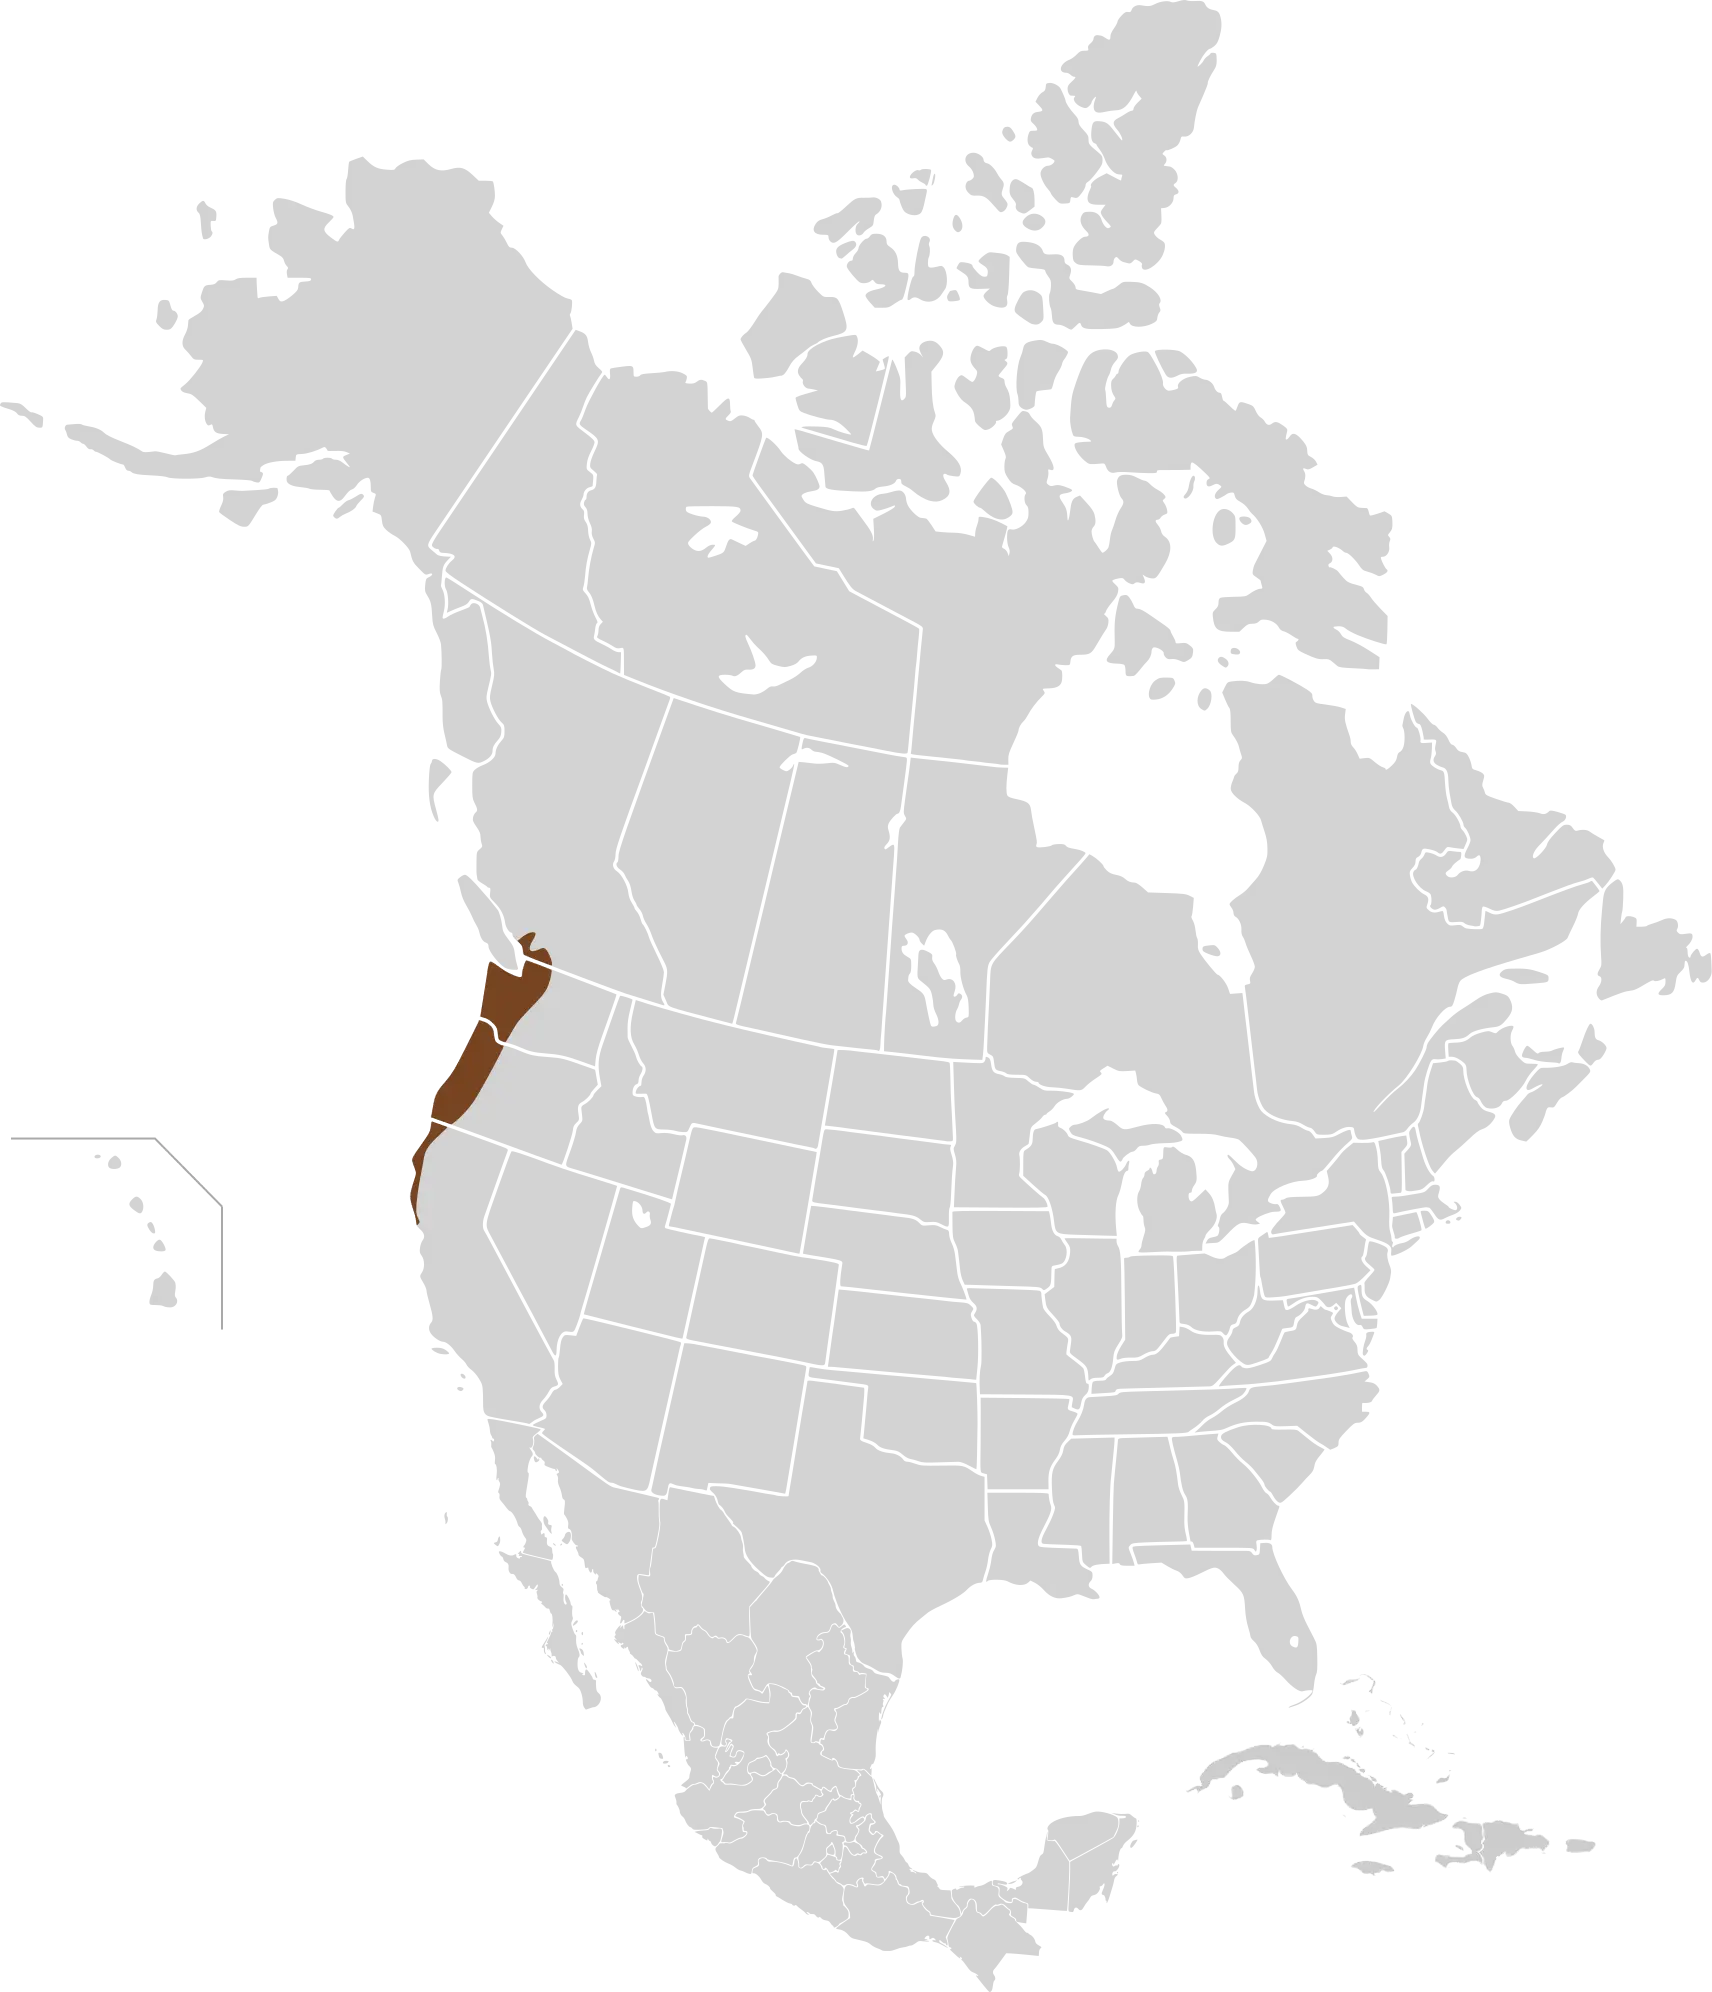 Pacific jumping mouse habitat map